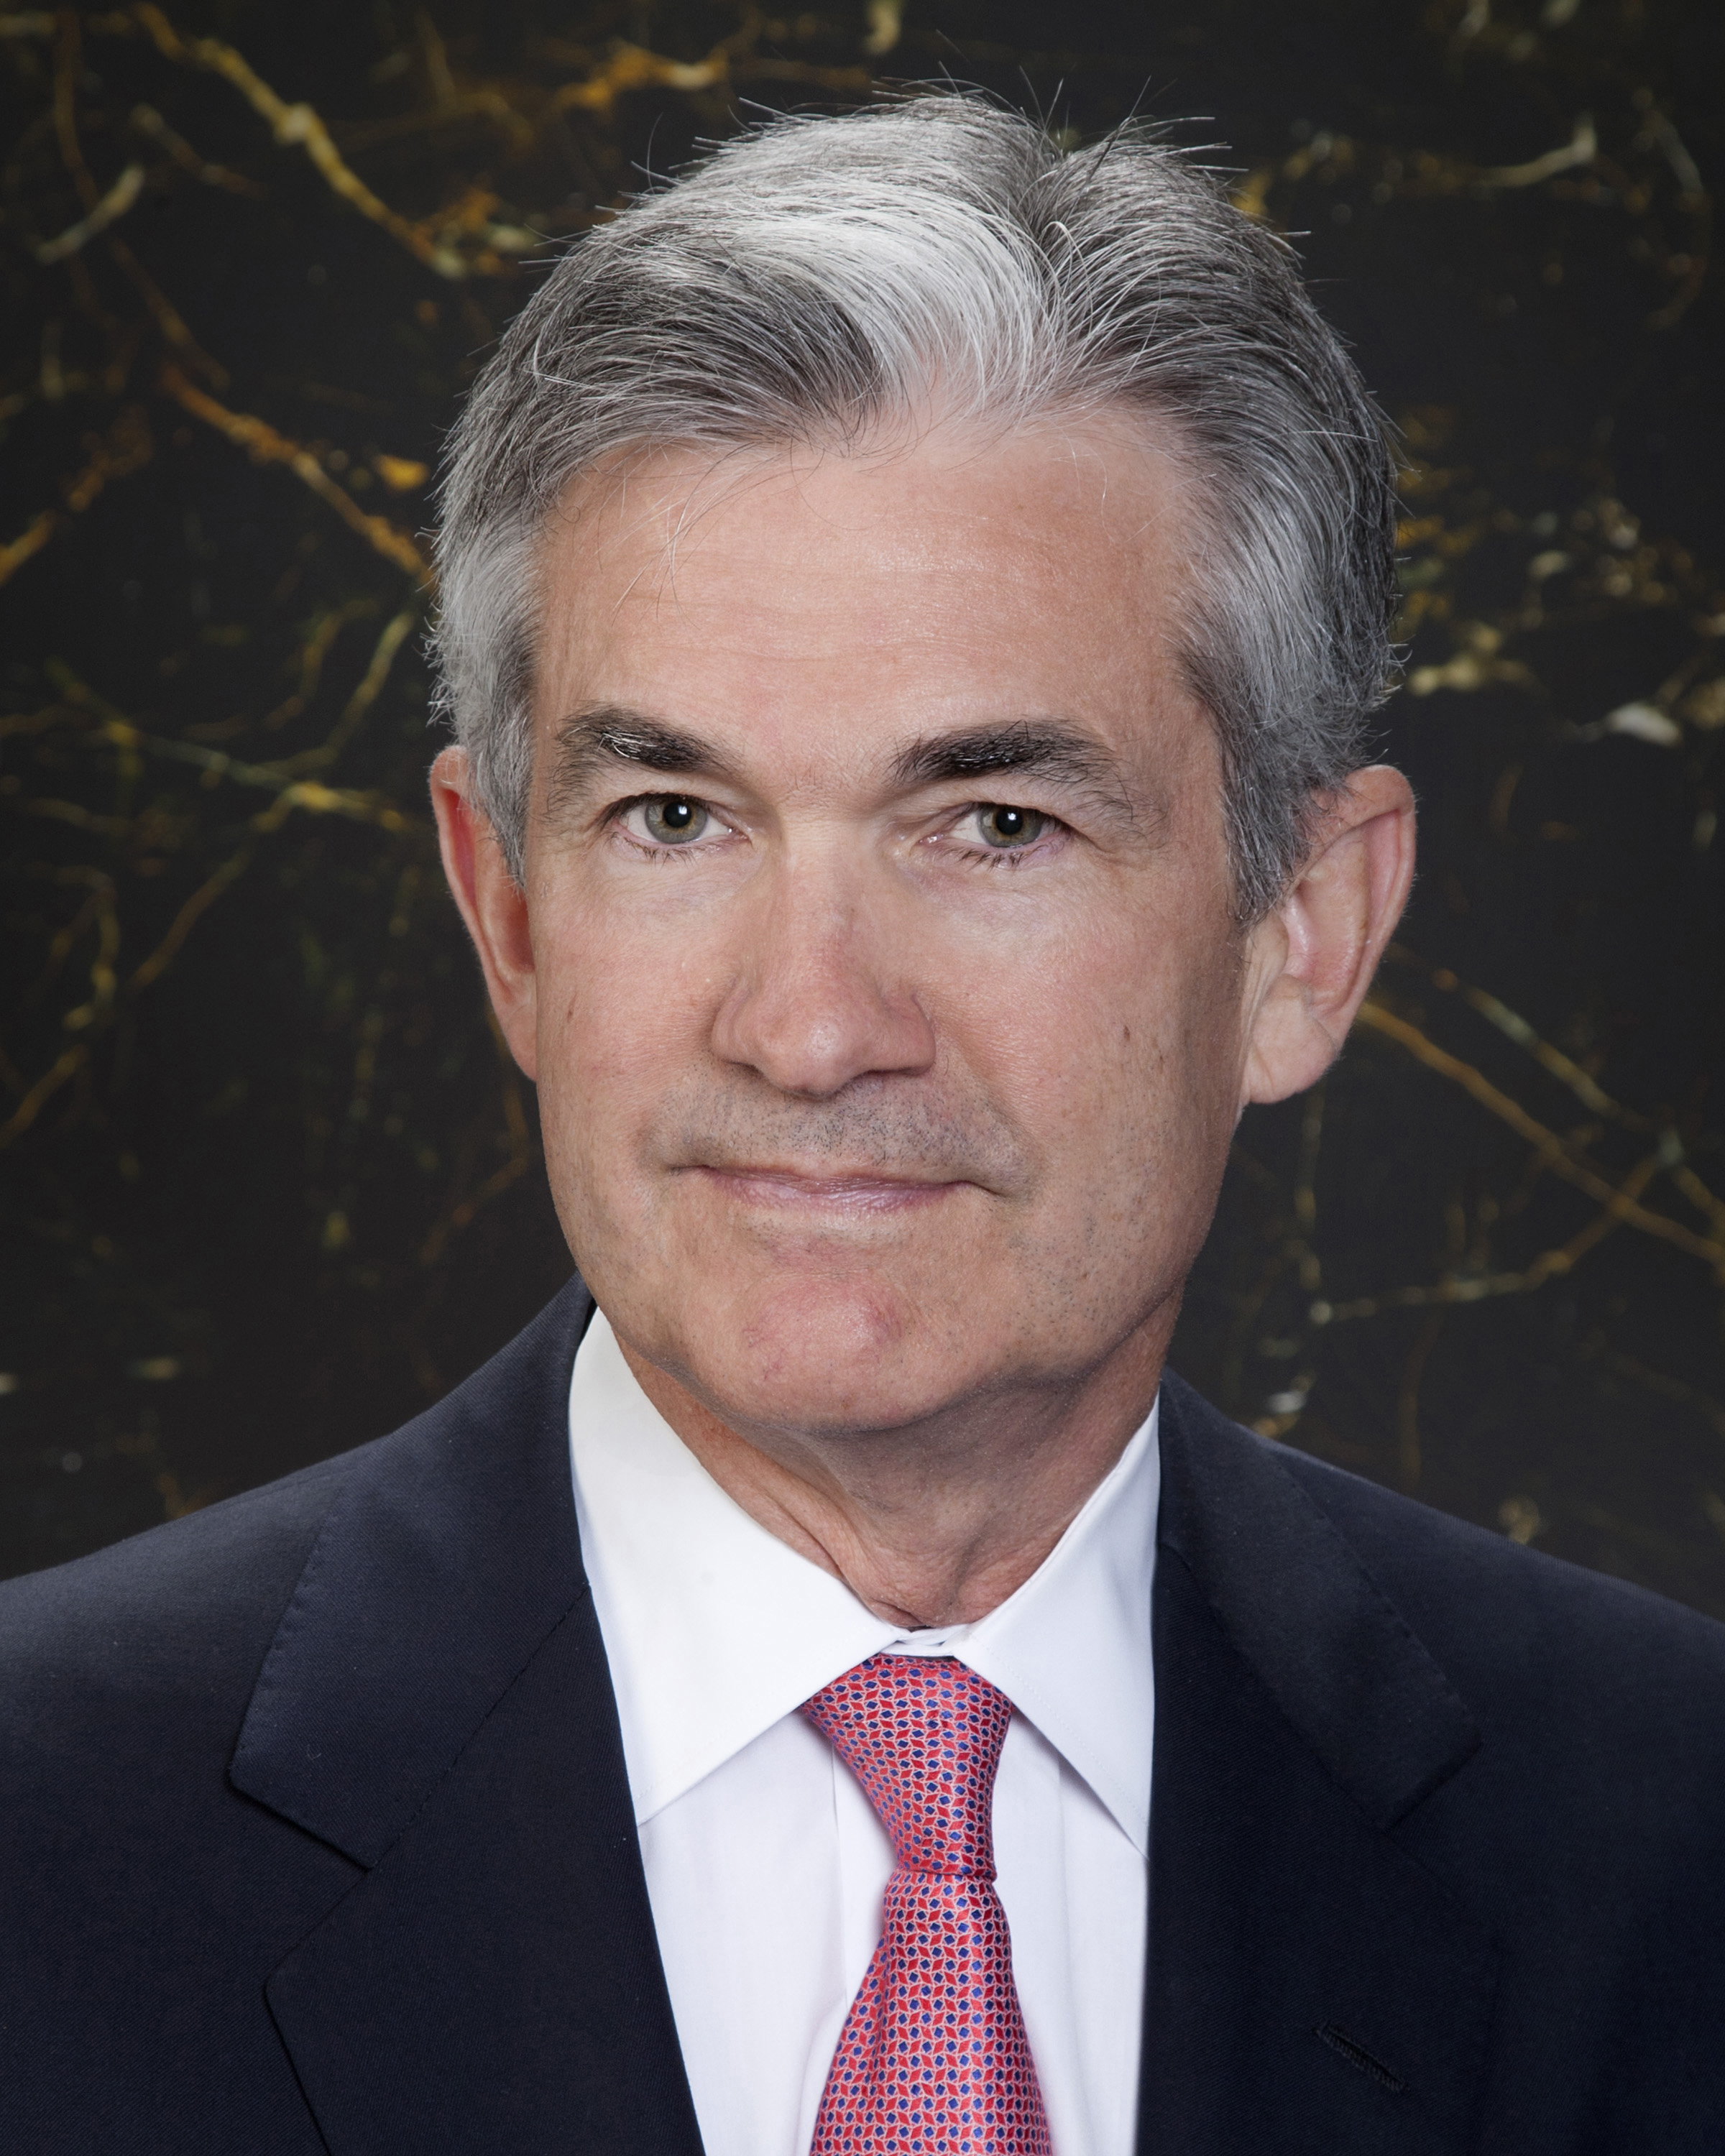 President Donald Trump has nominated Federal Reserve Governor Jerome Powell as the next Chairman of the U.S. central bank